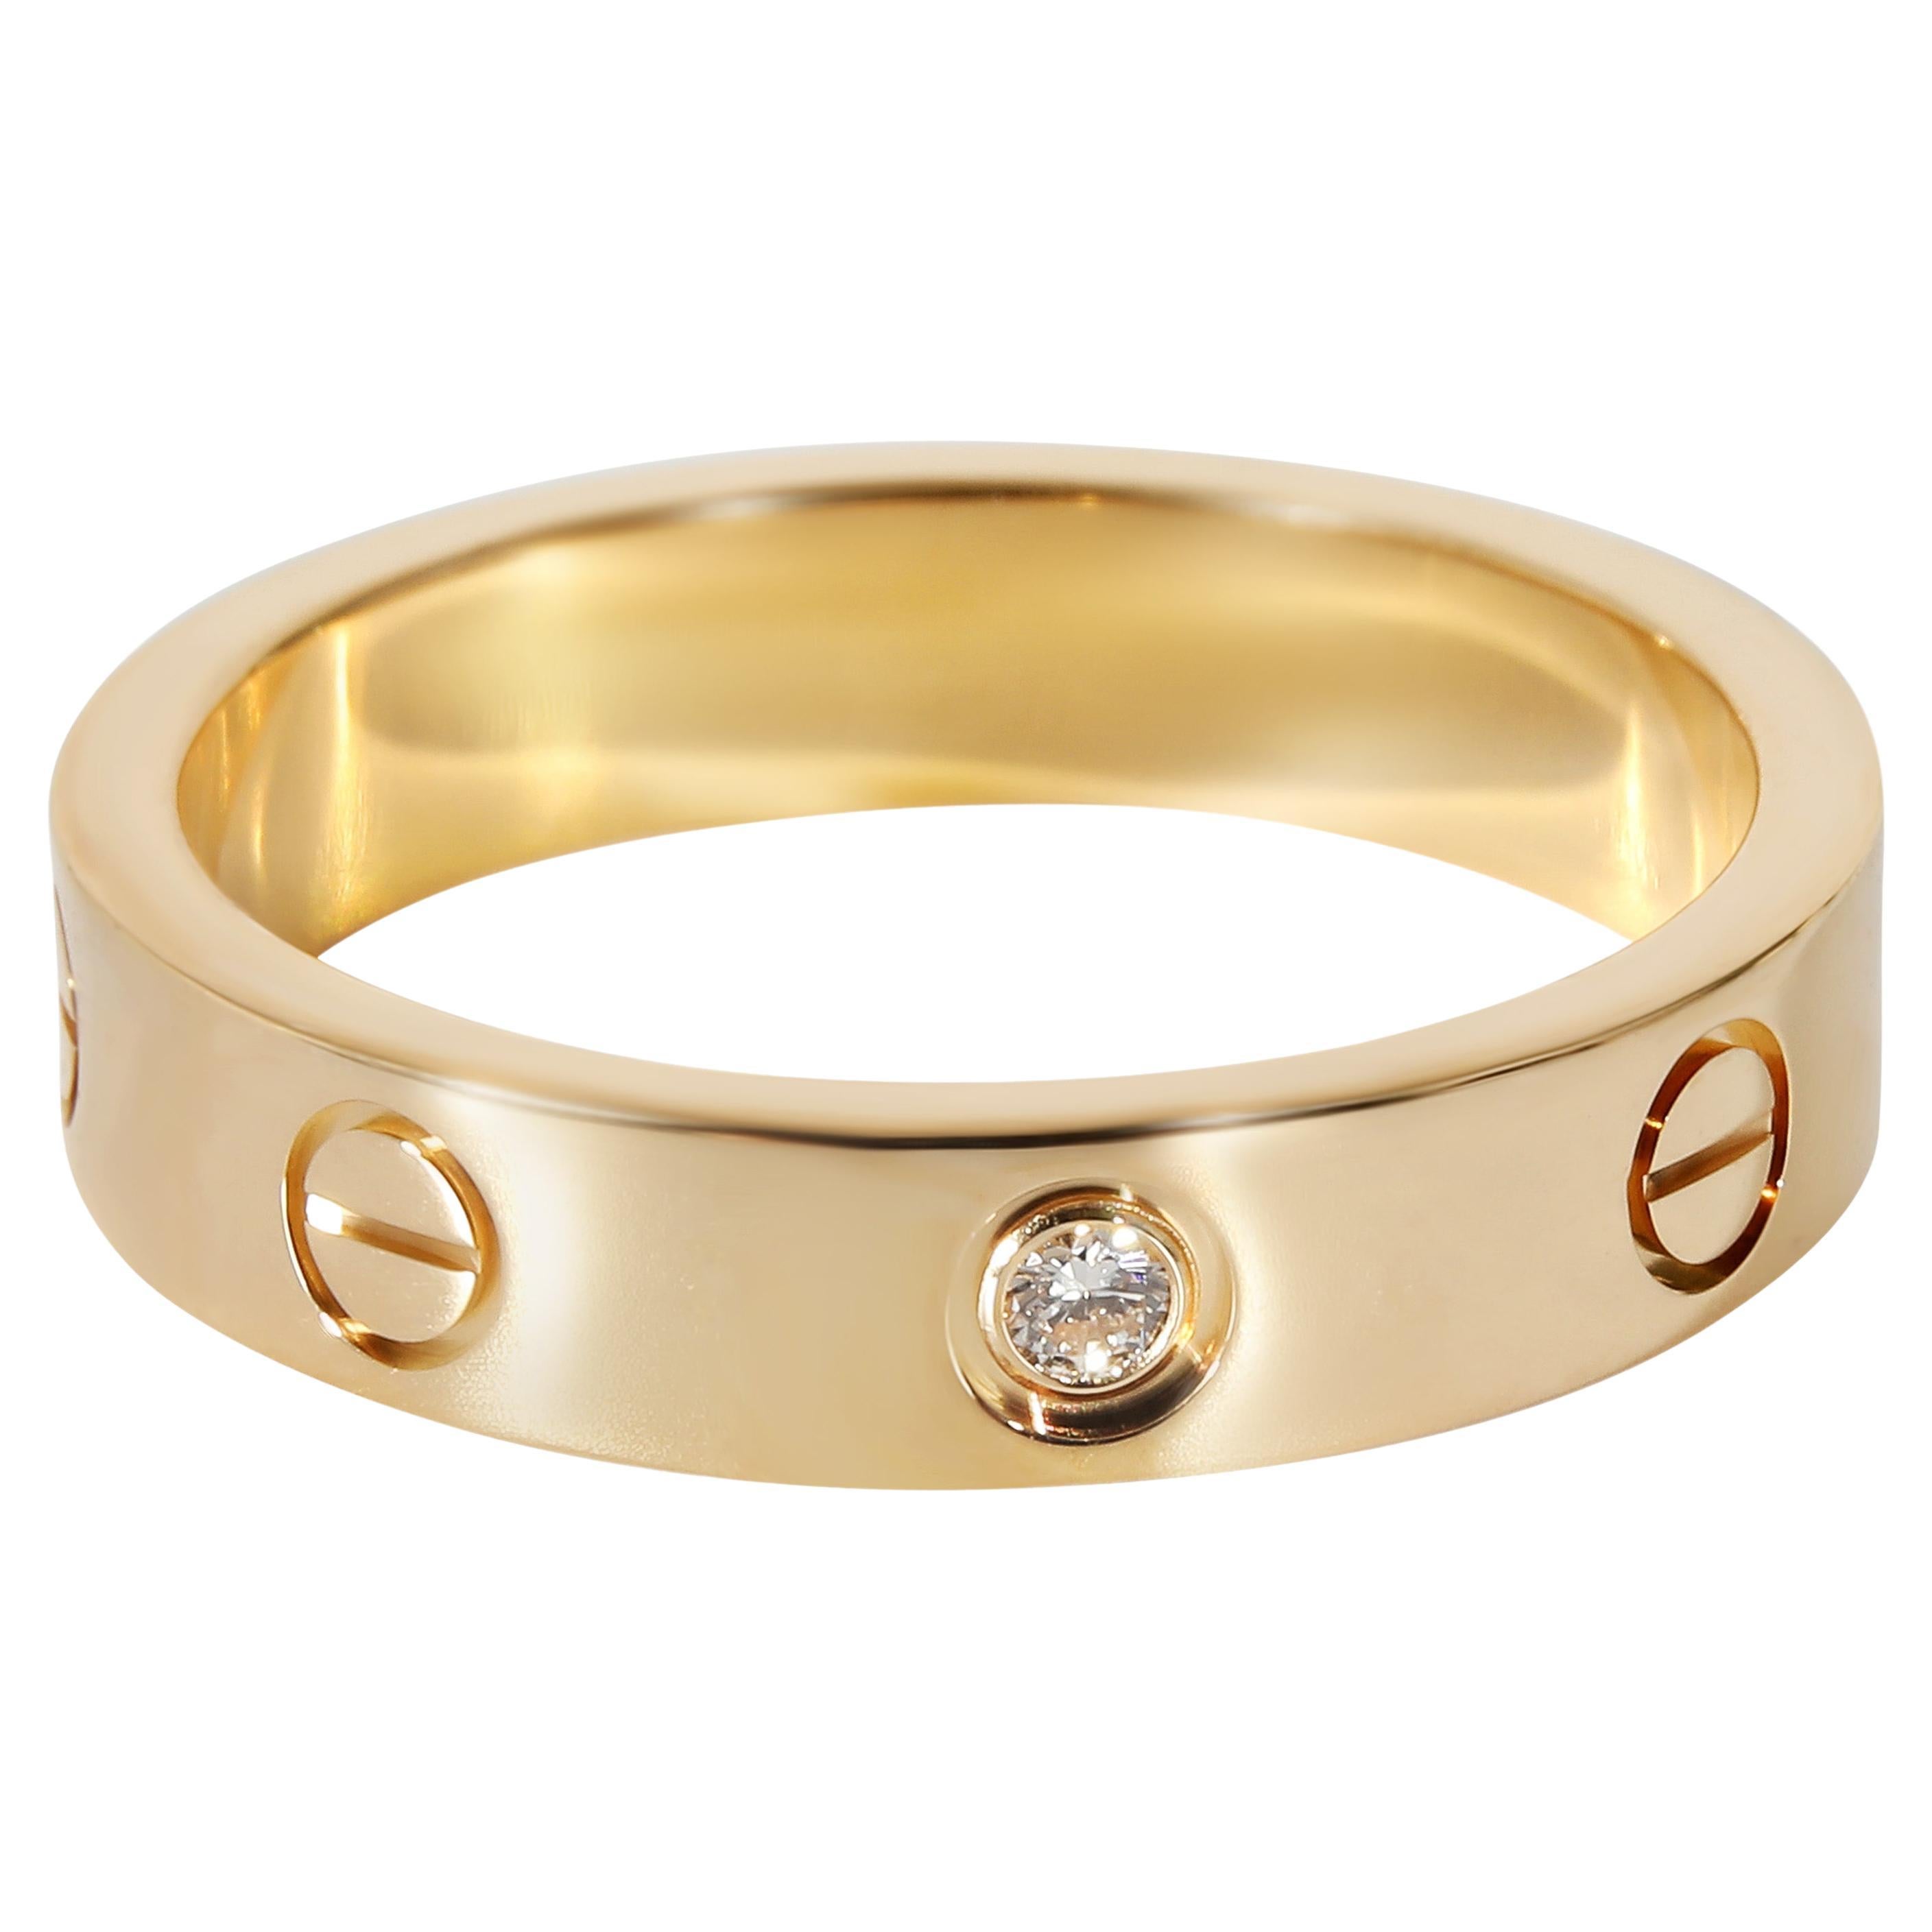 Cartier Love Diamond Ring in 18K Yellow Gold 0.02 ctw